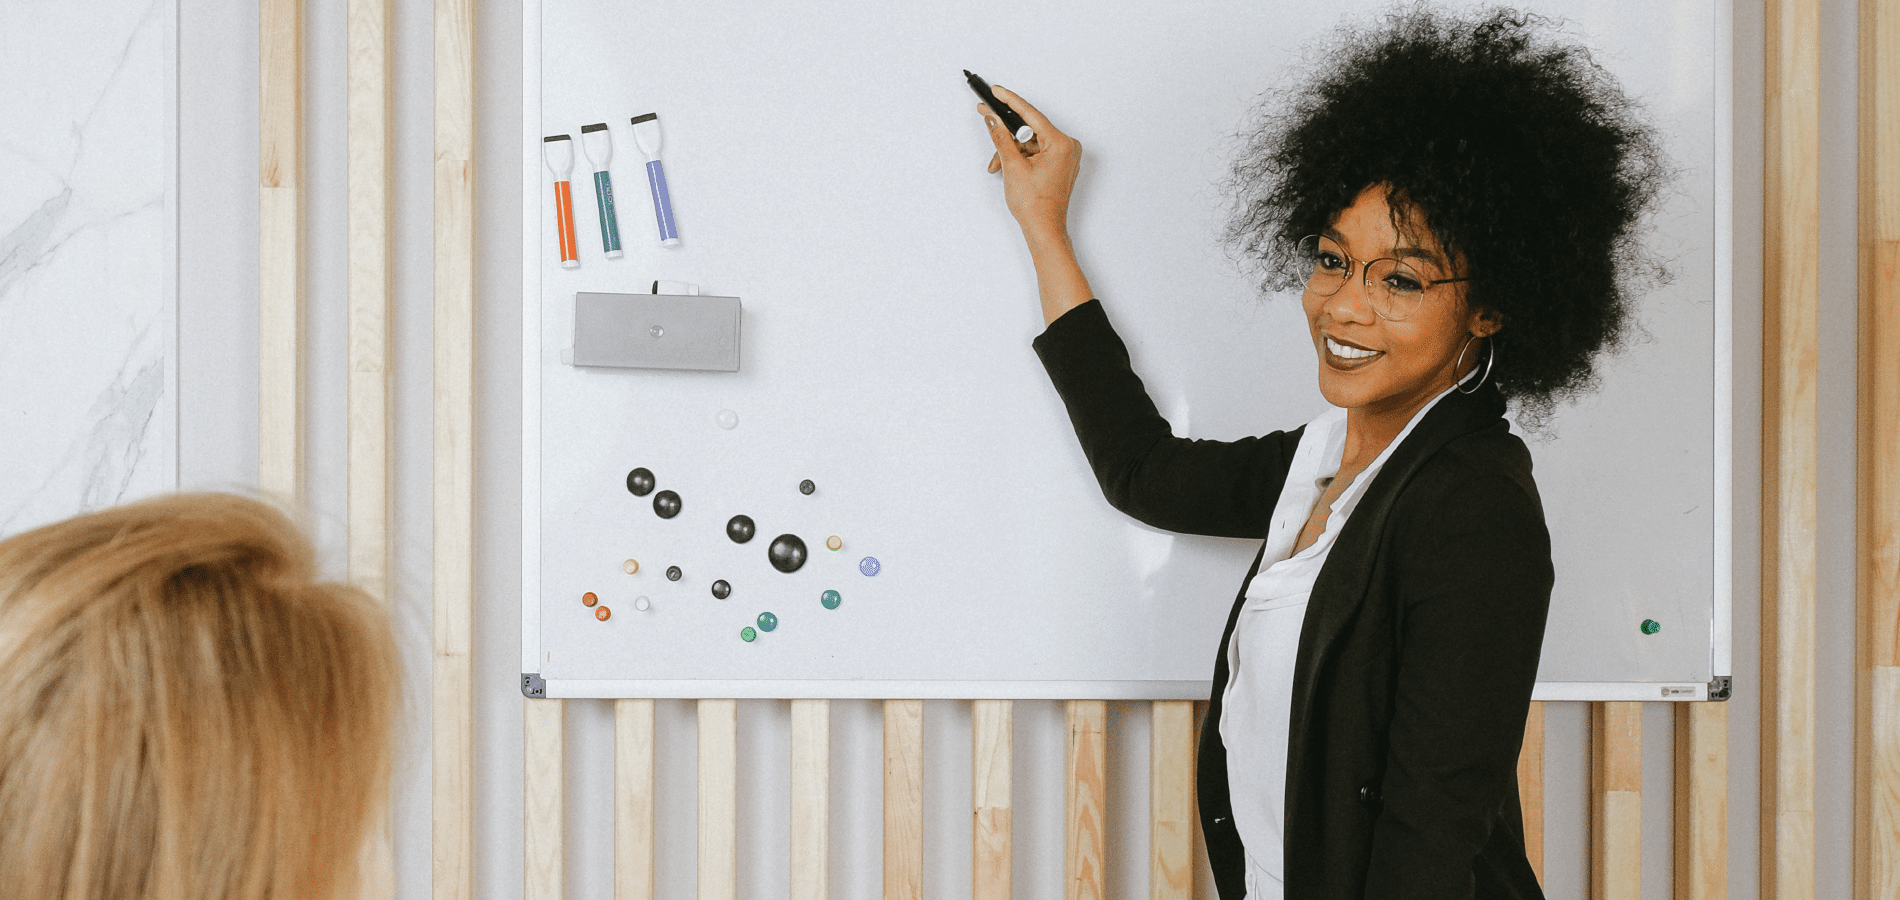 Trainer holding dry erase marker and smiling in front of white board